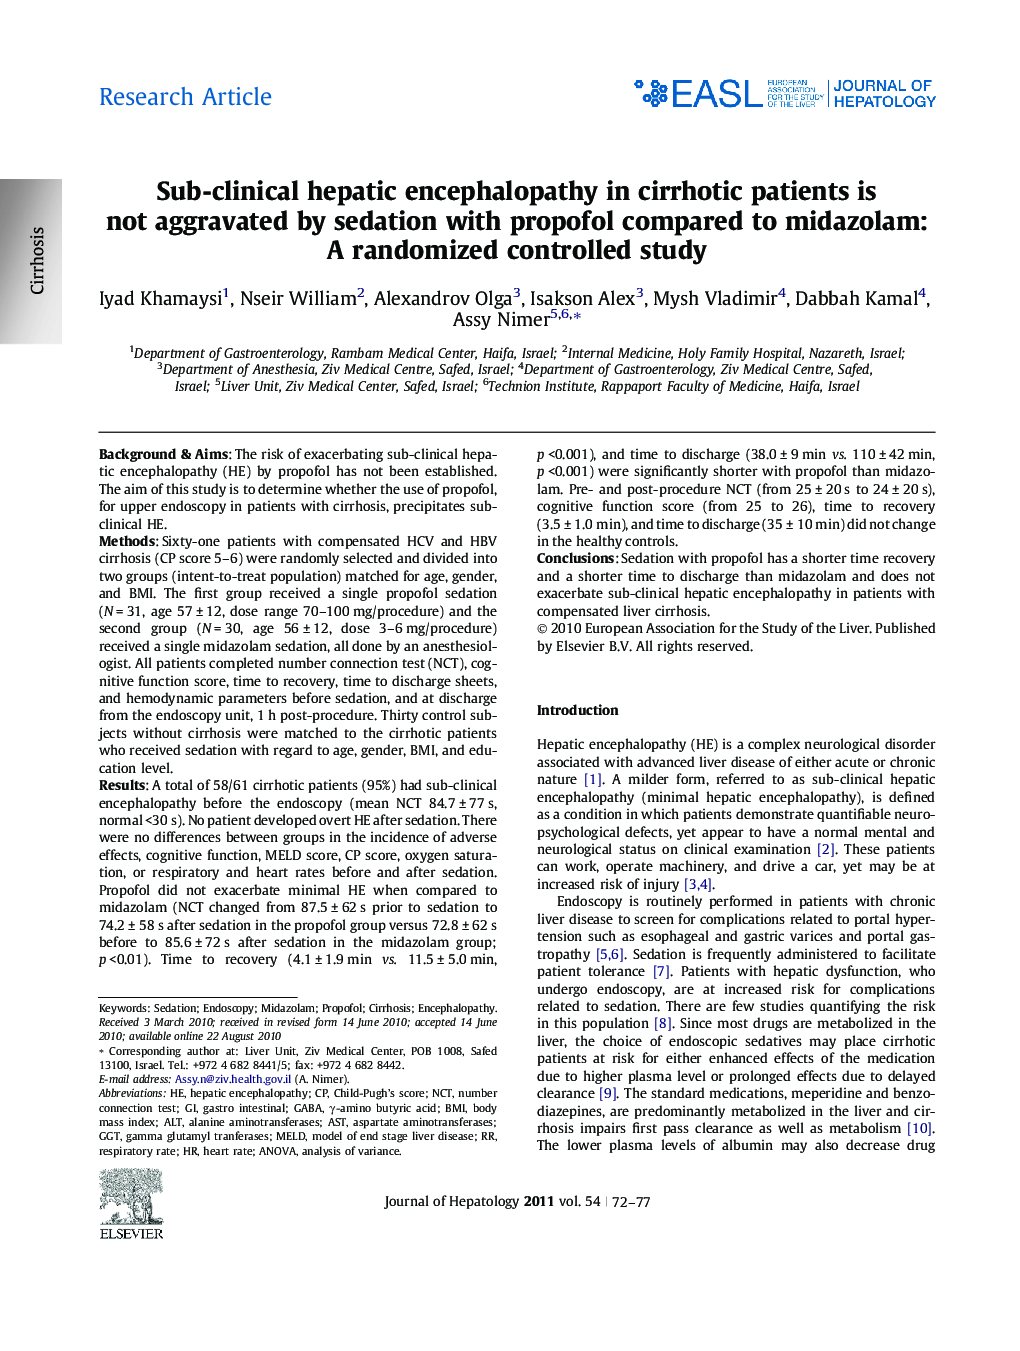 Research ArticleSub-clinical hepatic encephalopathy in cirrhotic patients is not aggravated by sedation with propofol compared to midazolam: A randomized controlled study